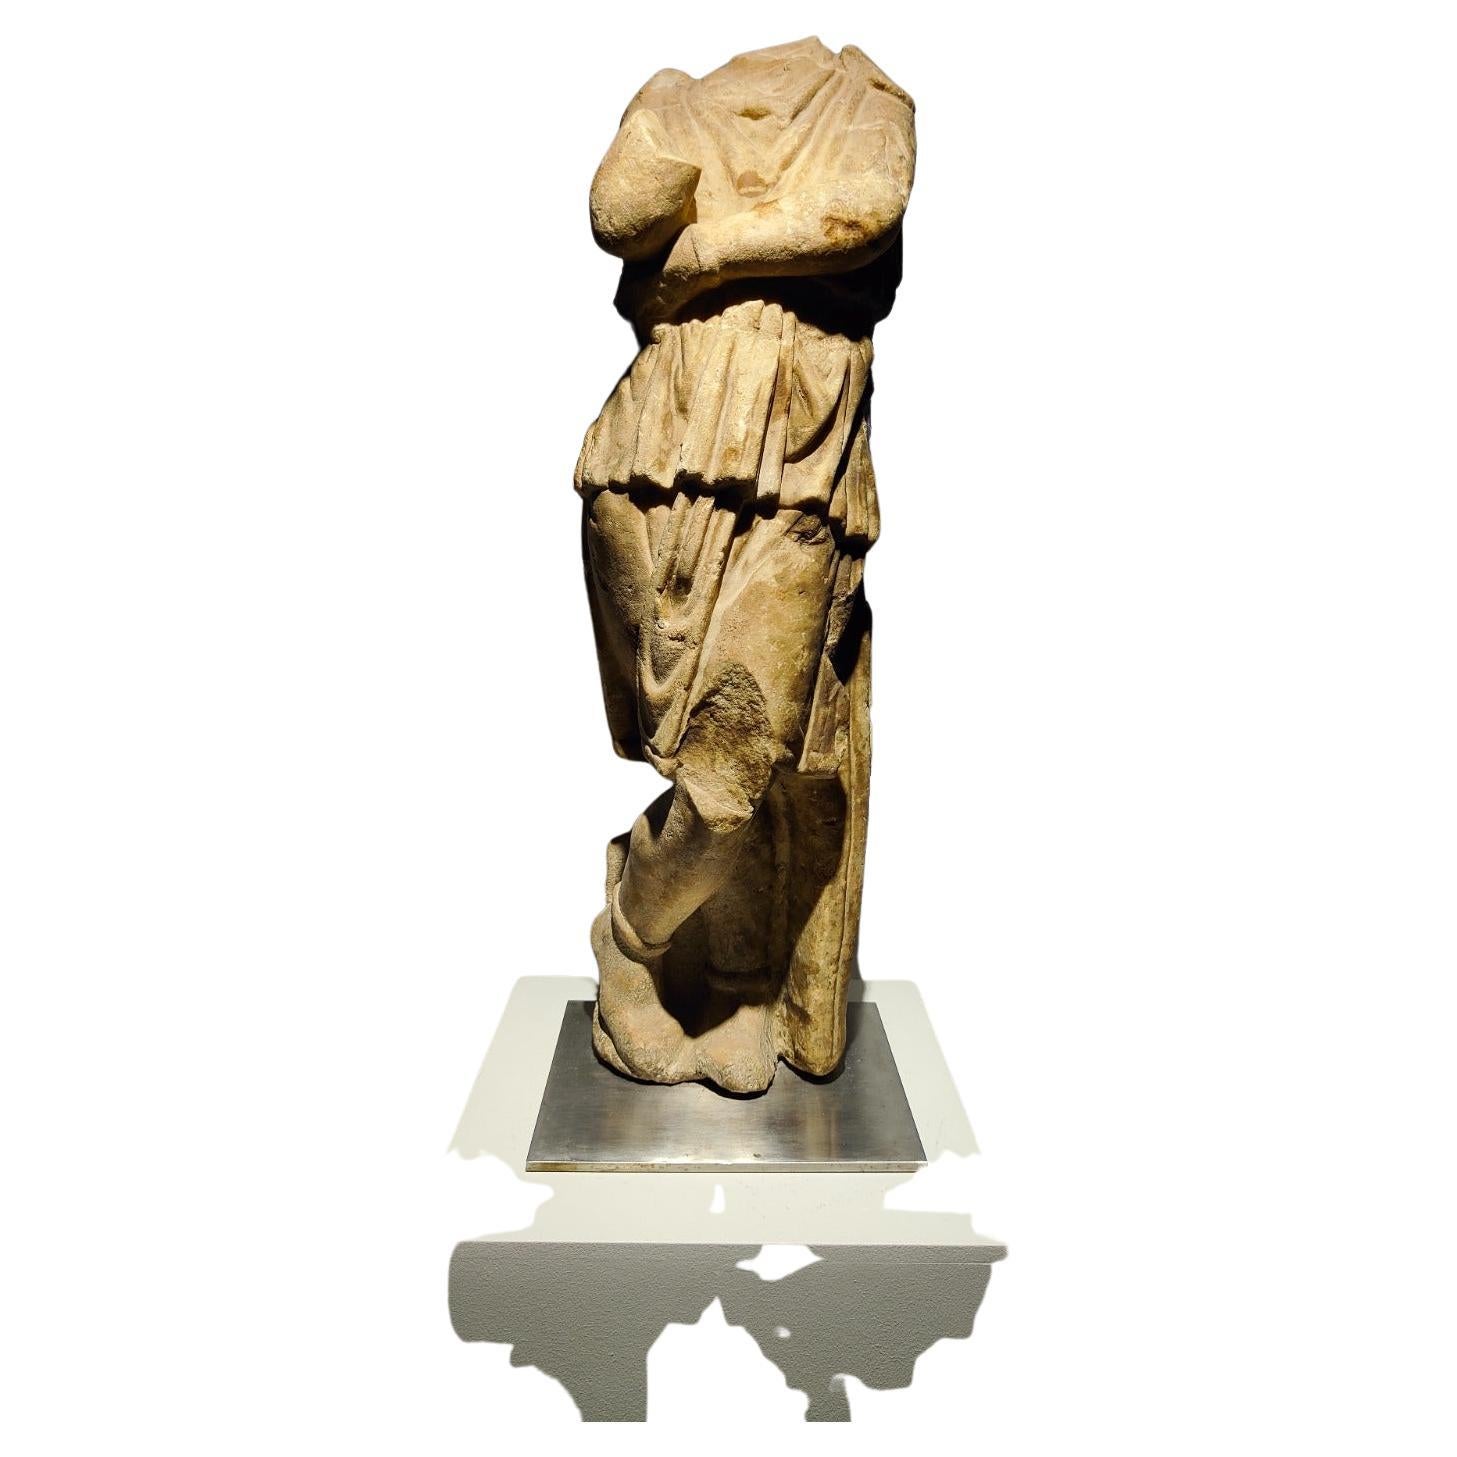 A Roman marble trapezophorus in the Form of a Barbarian Dacian young figure.
Circa 1st-2nd century A.D.
Measure: height 24 1/4 inches (62 cm).
Property from Mr. Radu Moldovan, Skokie, Illinois

Provenance:
B.C. Holland Gallery, Chicago,